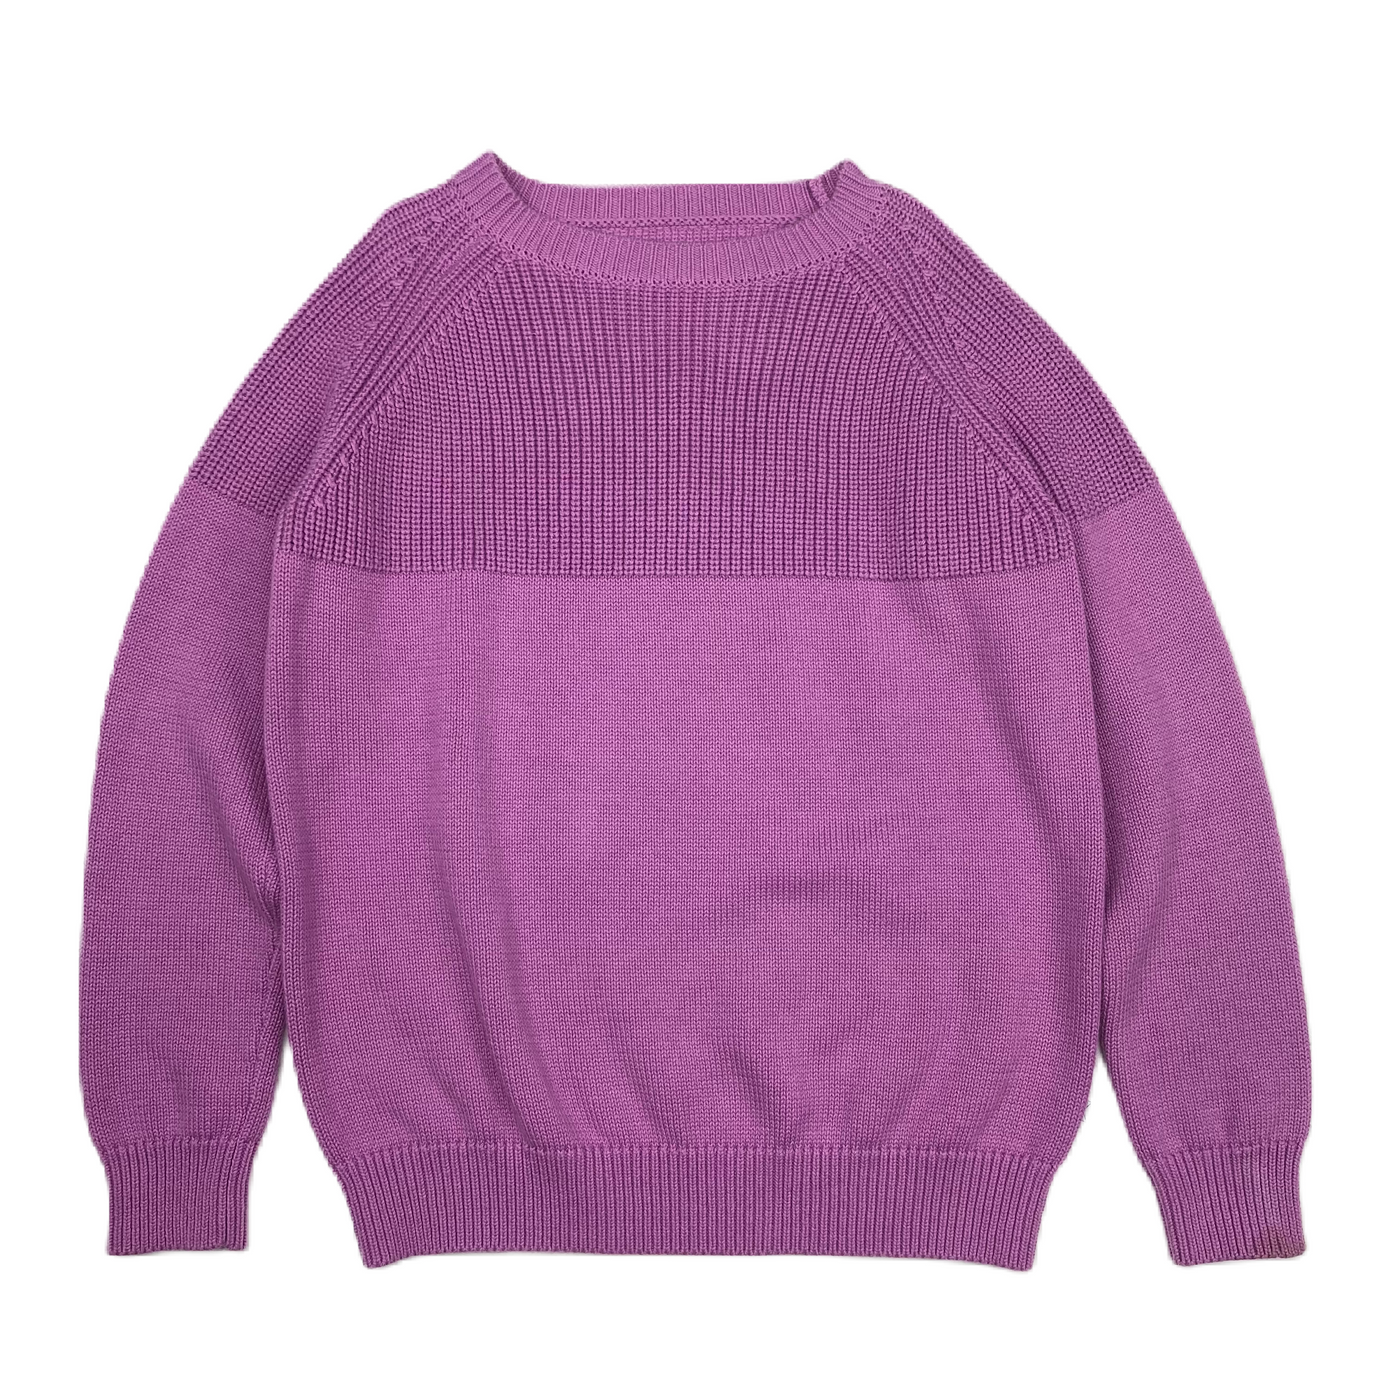 Repose Ams. - Knitted sweater orchid 8y